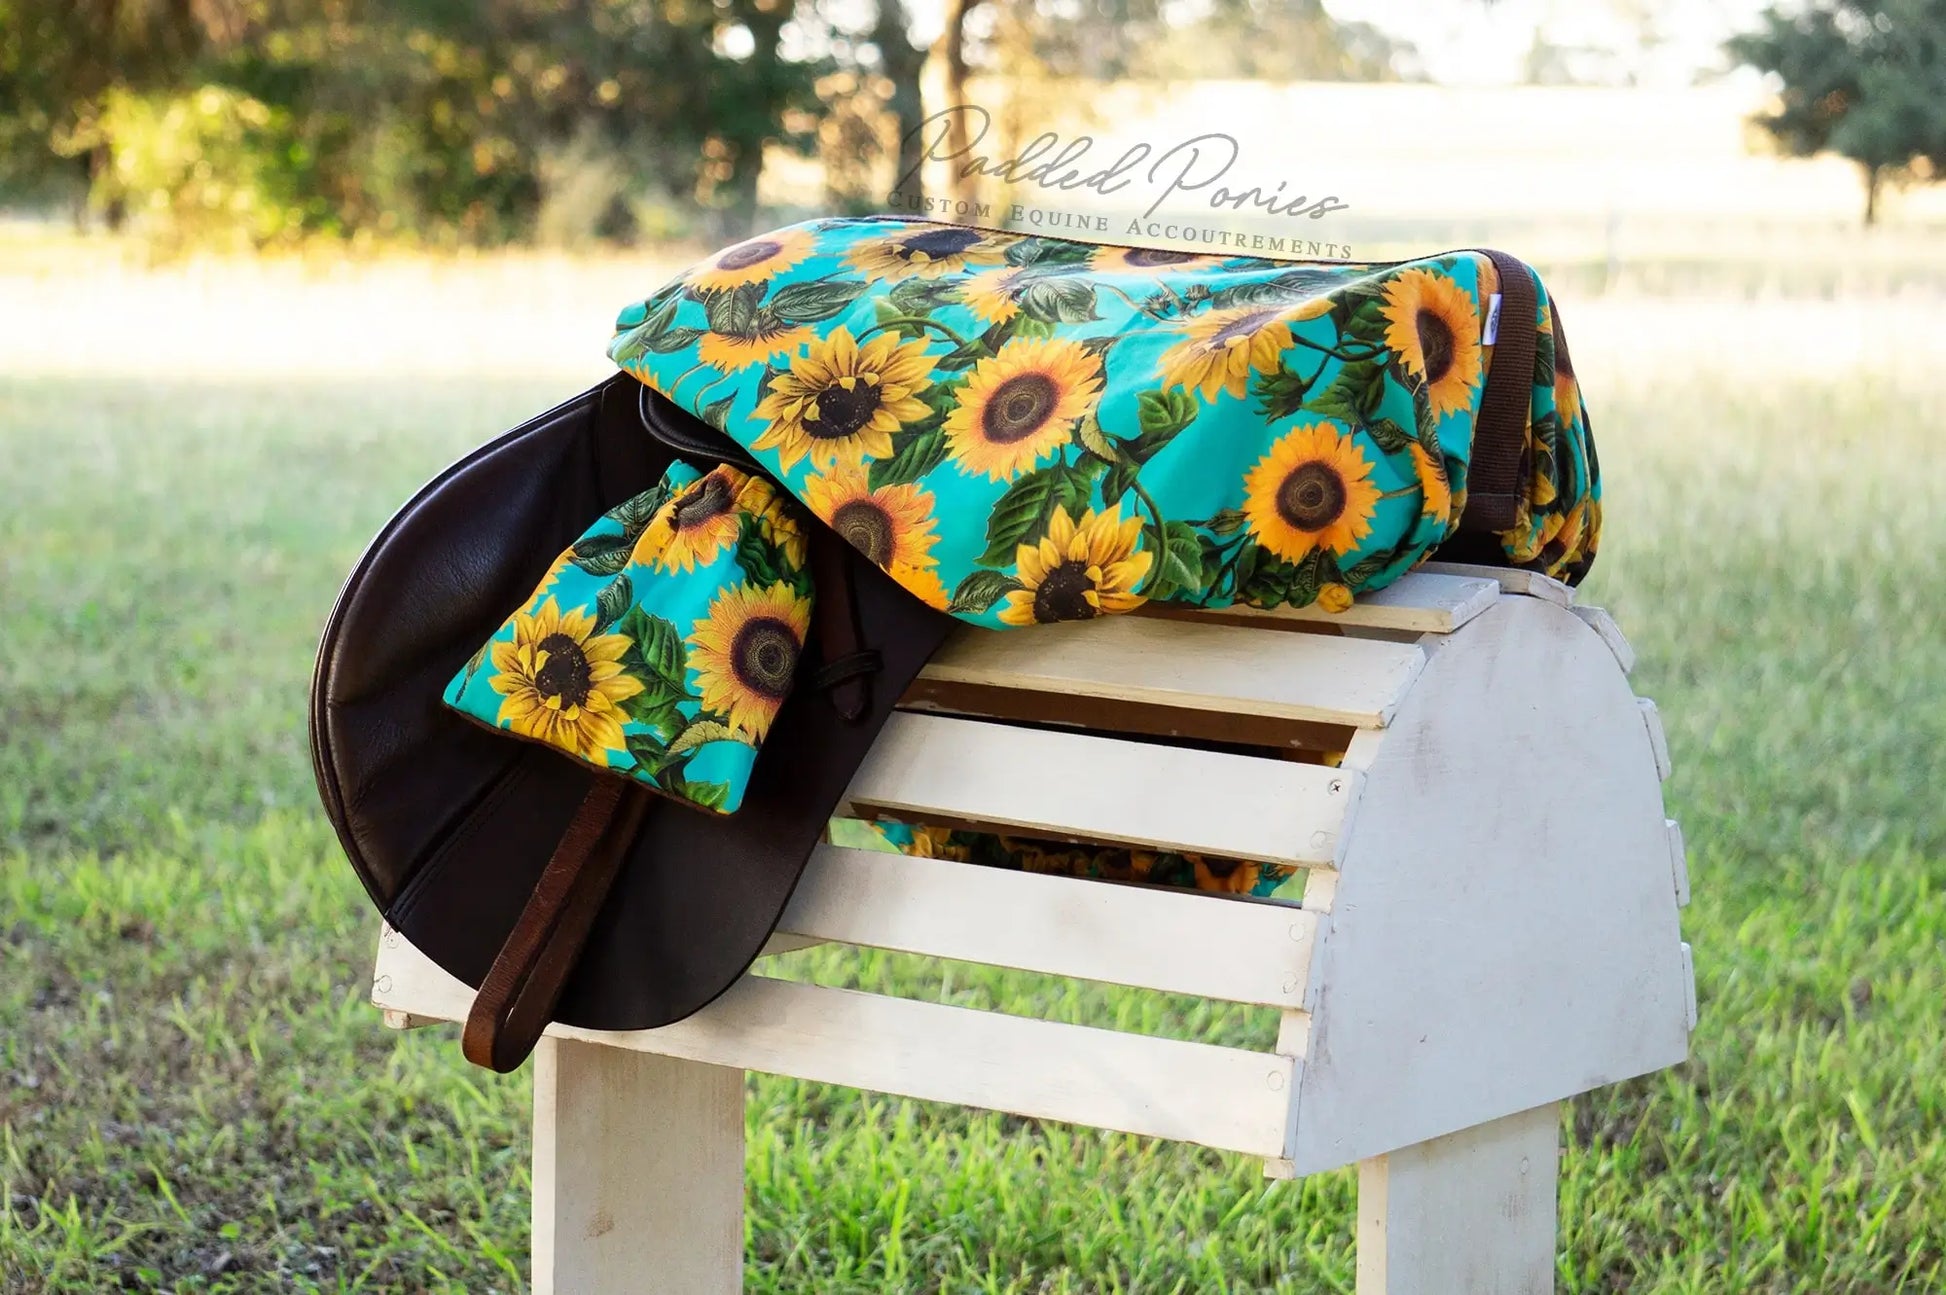 Turquoise Teal Aqua Yellow Sunflowers Floral All Purpose Saddle Cover with Matching Stirrup Covers